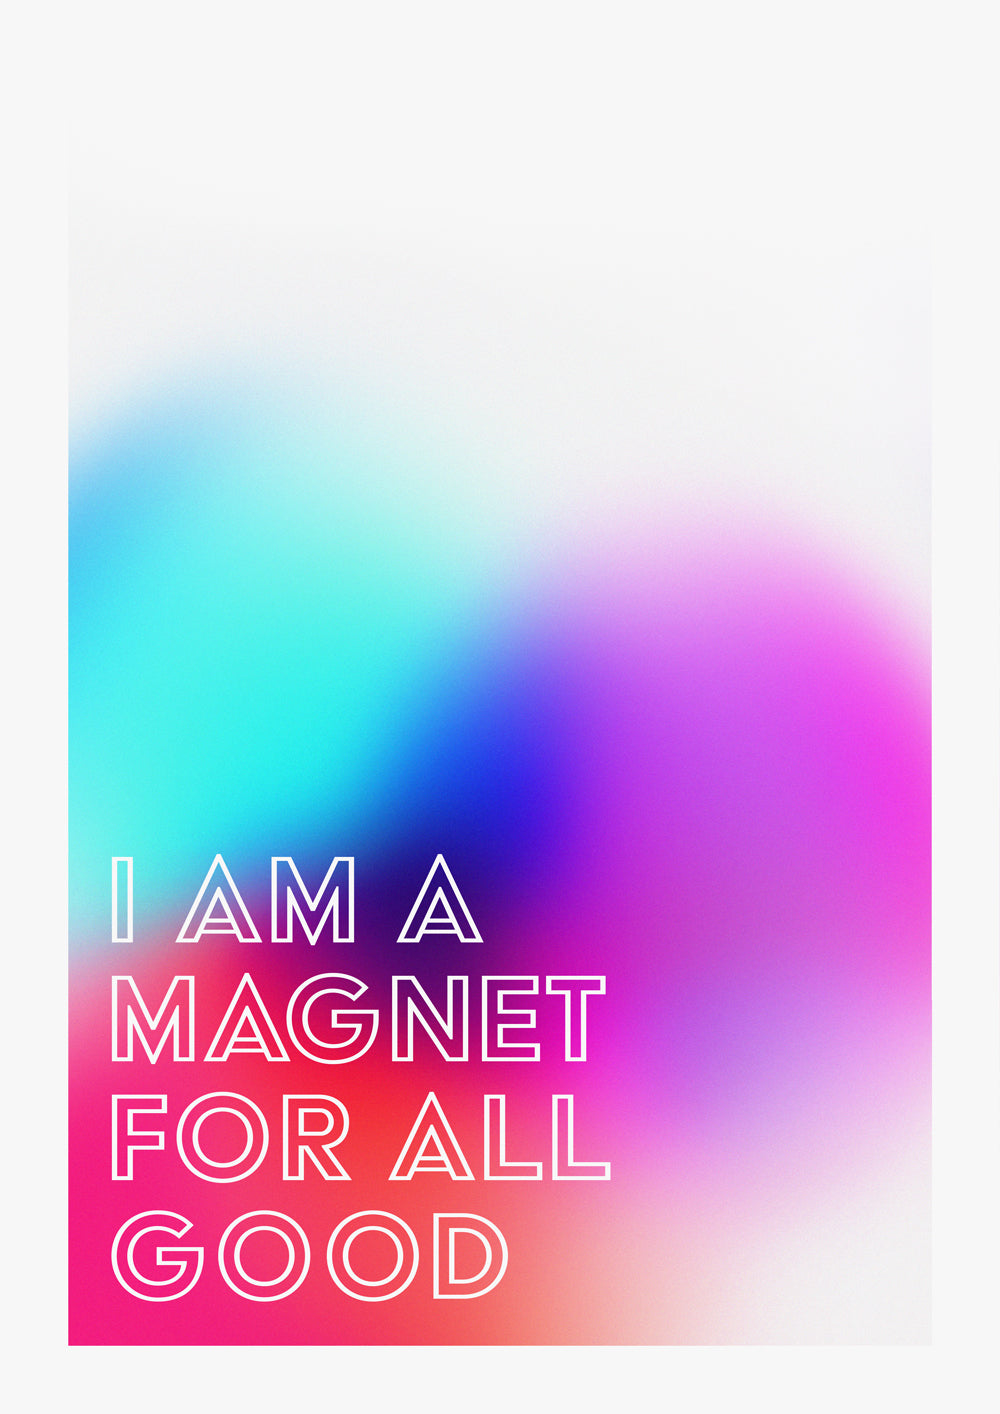 Law of Attraction Affirmation Poster Law of Abundance Gradient Artwork Typographic Wall Art Print "I Am a Magnet For All Good"